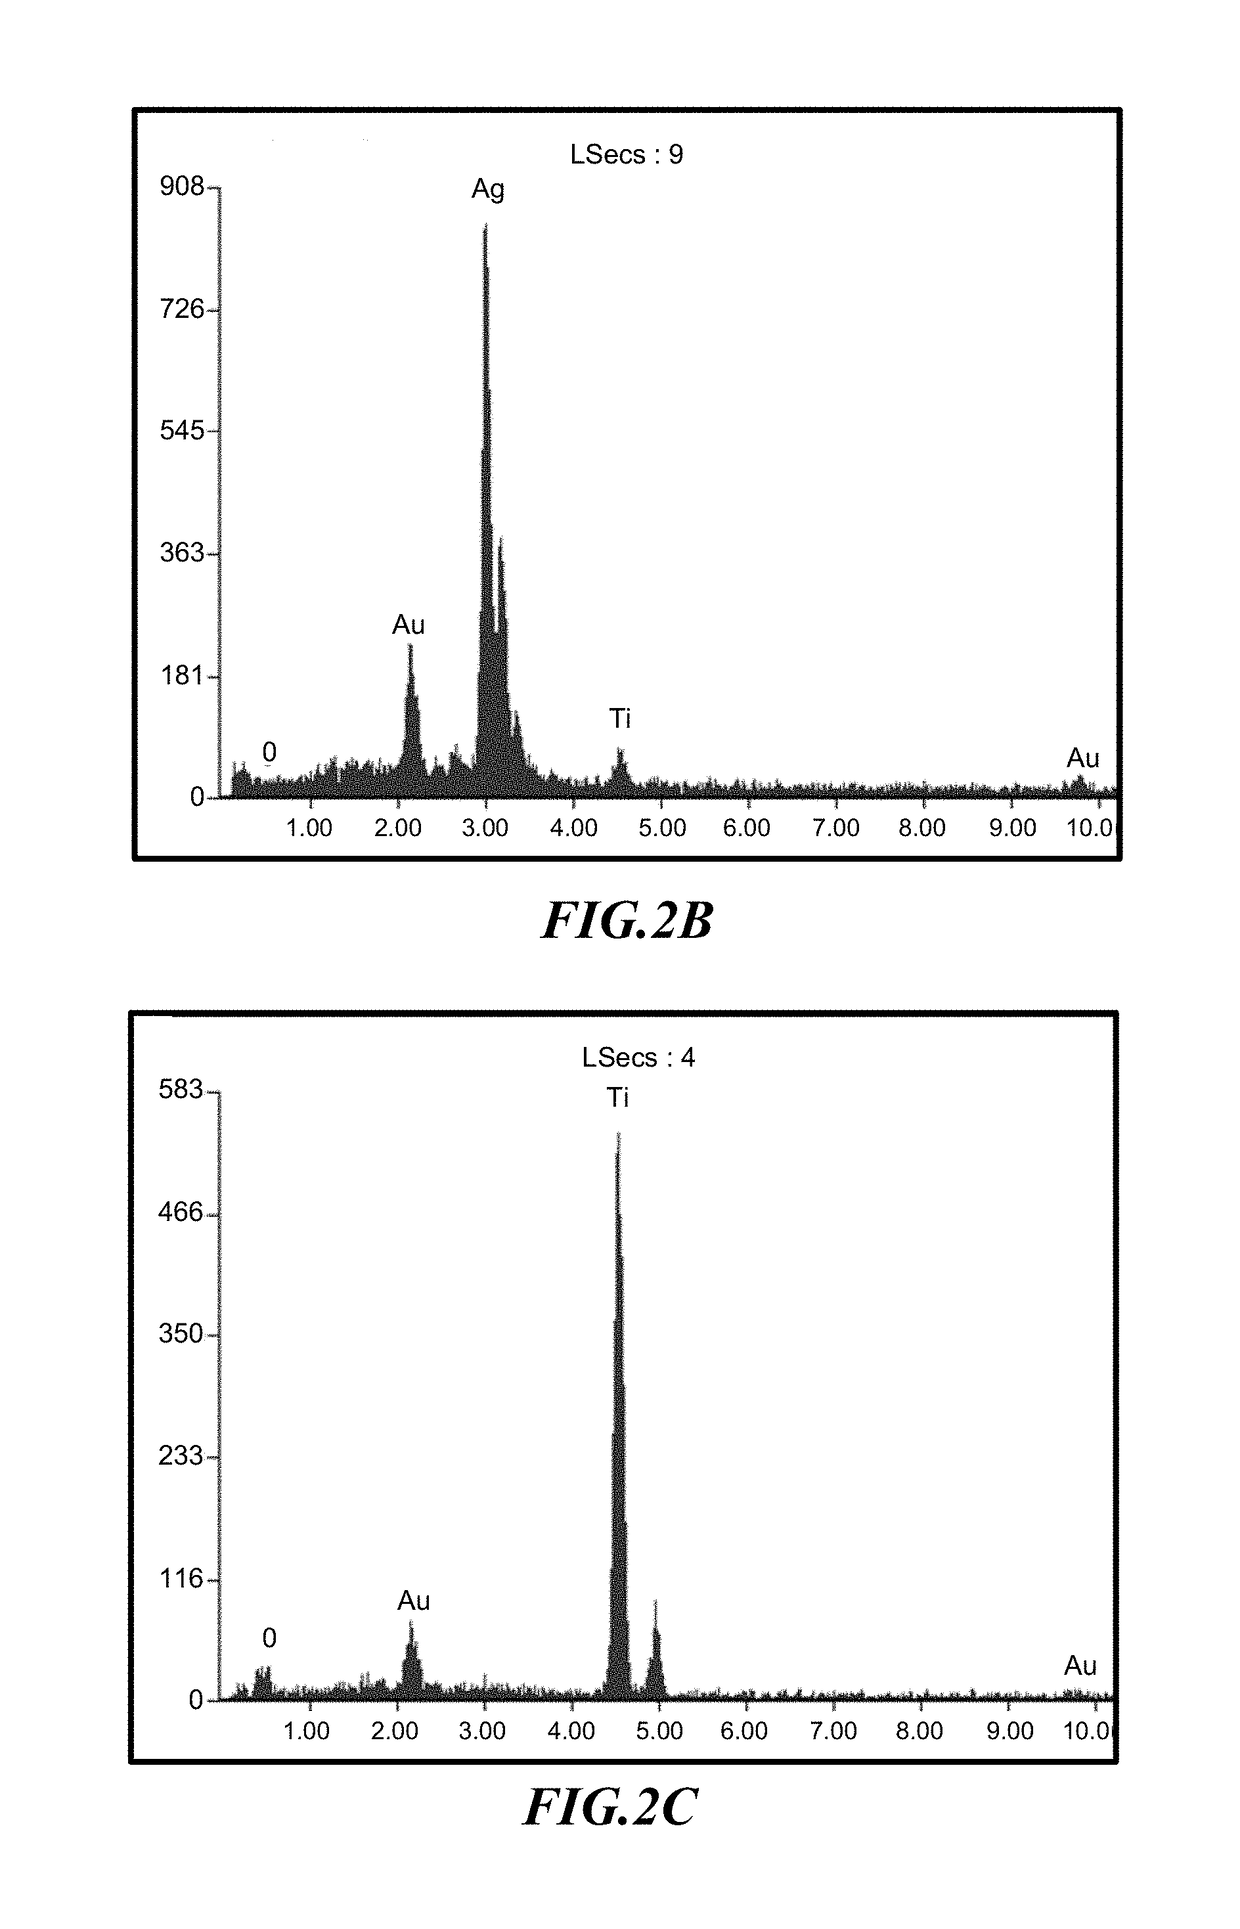 Modified metal materials, surface modifications to improve cell interactions and antimicrobial properties, and methods for modifying metal surface properties